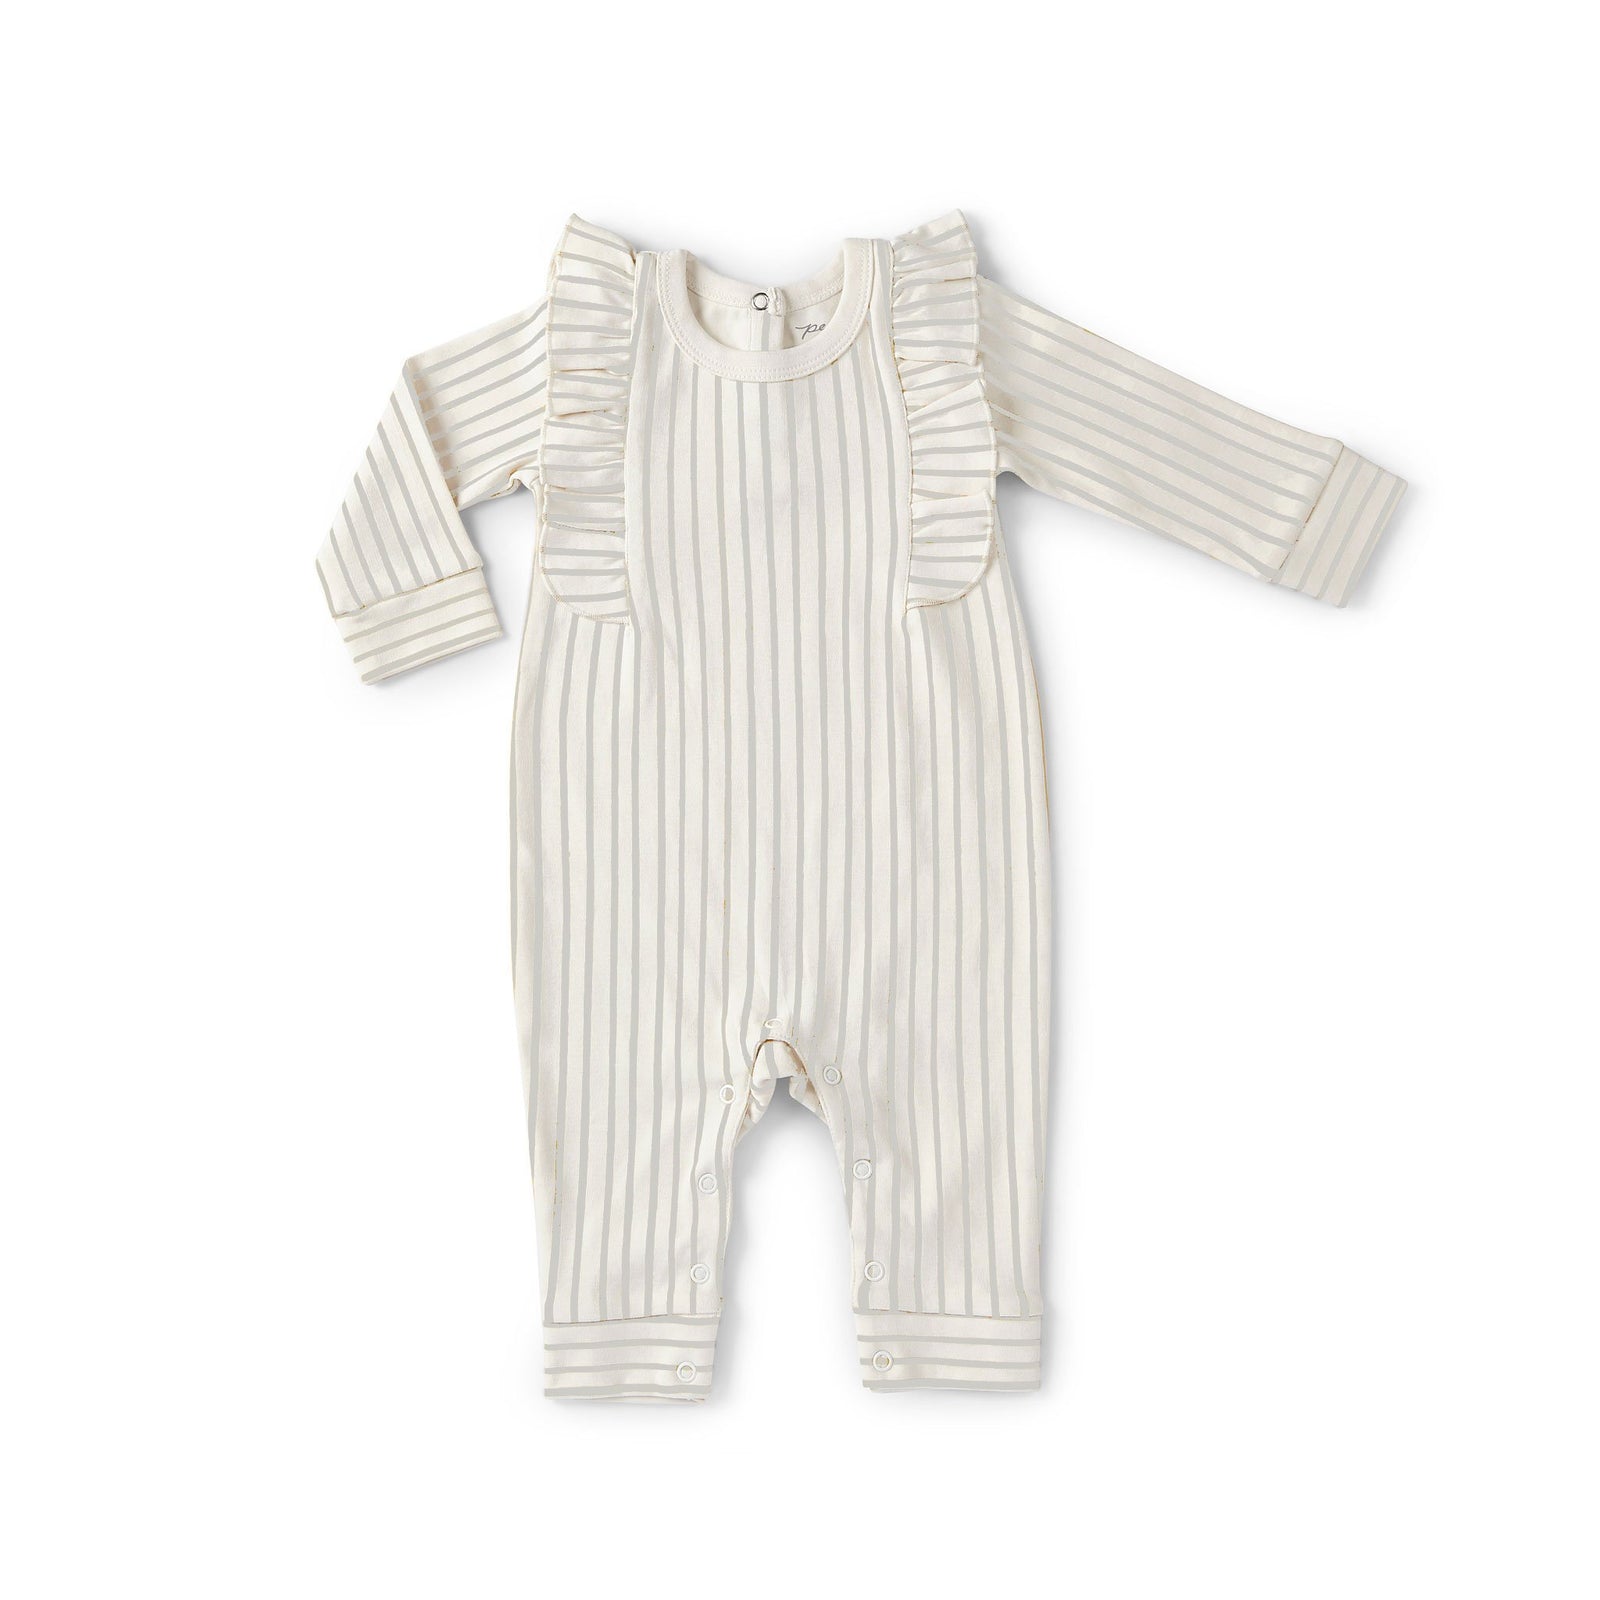 Pehr Long Sleeve Stripes Away Grey w/Ruffle Romper. Certified organic cotton. White with grey stripes.